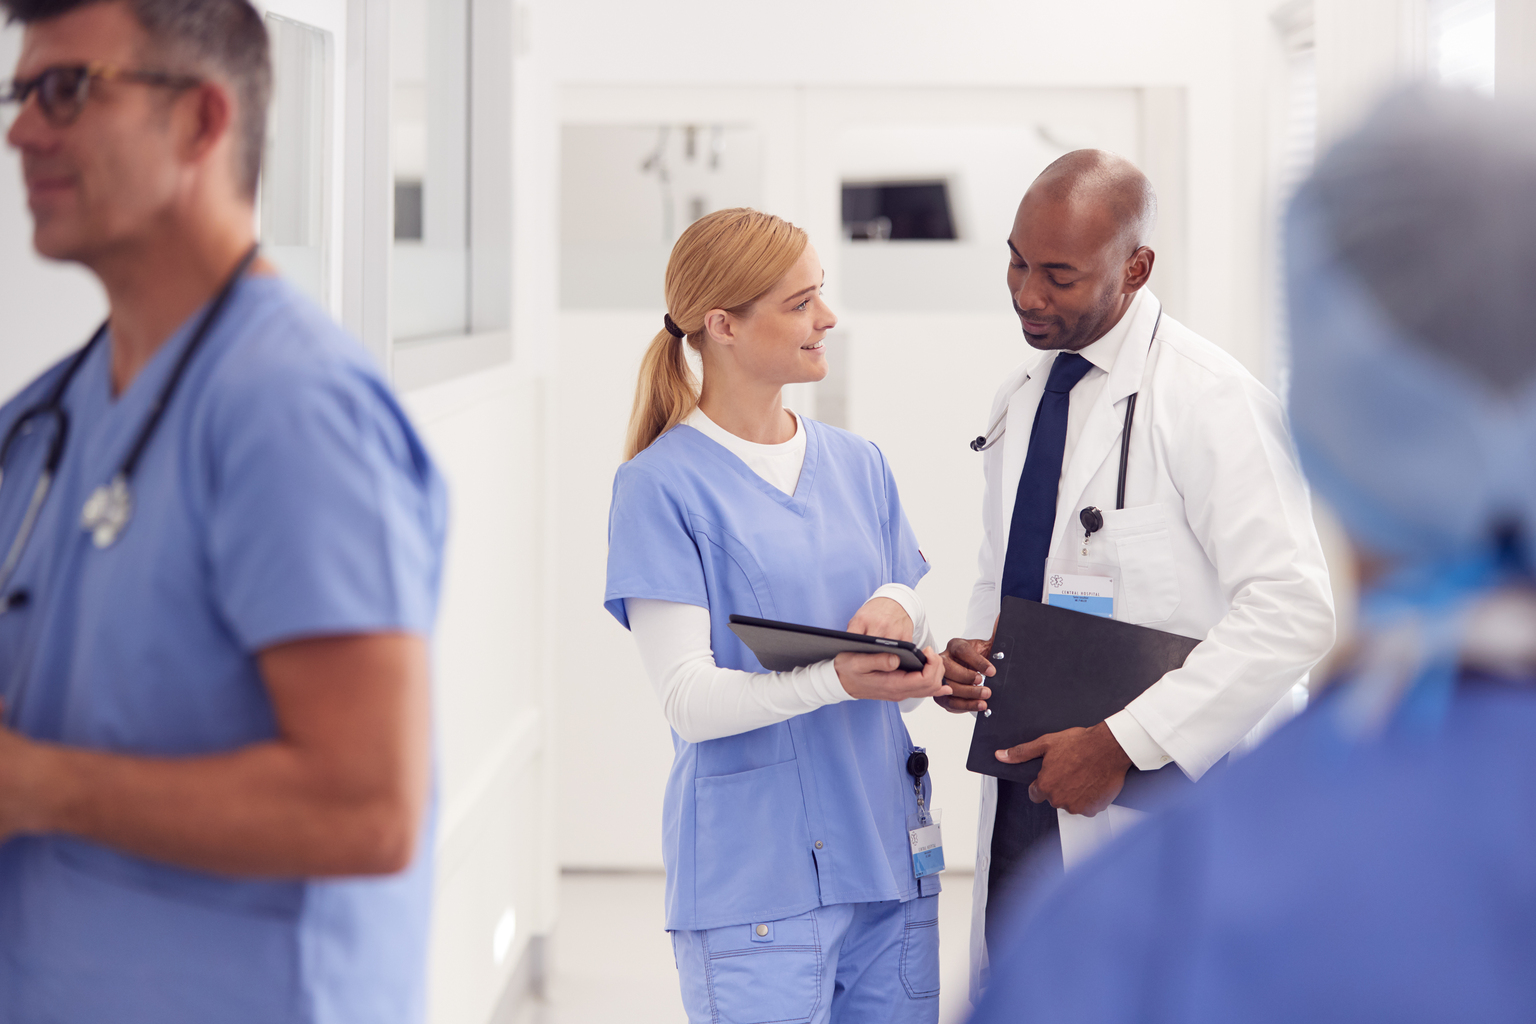 Evaluating which sepsis surveillance solution is right for your hospital